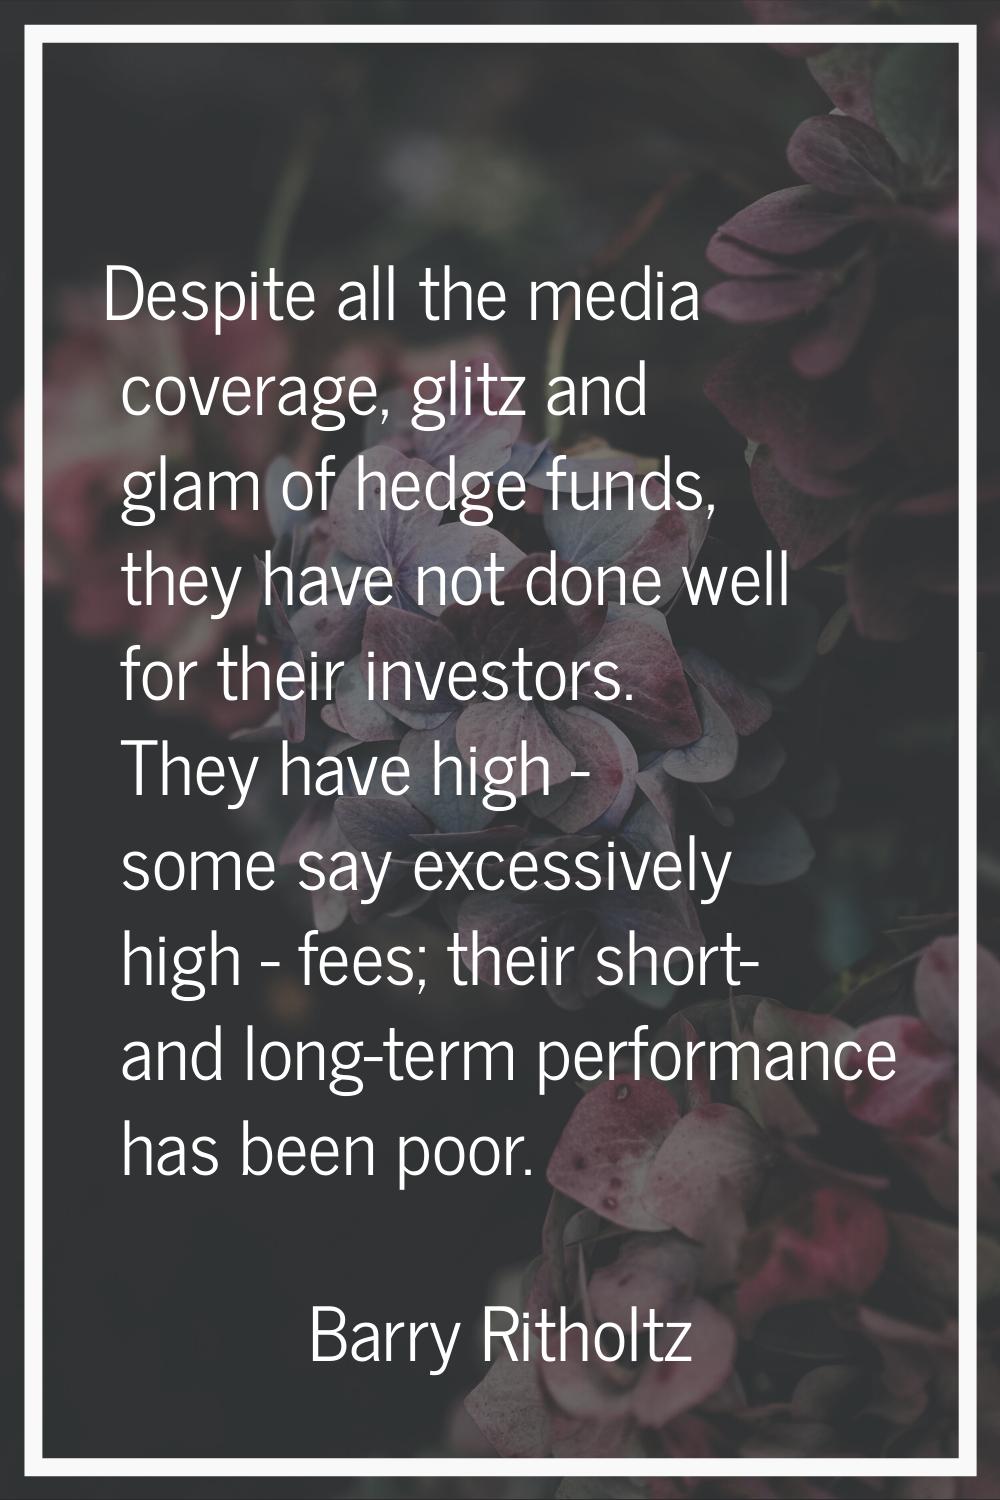 Despite all the media coverage, glitz and glam of hedge funds, they have not done well for their in